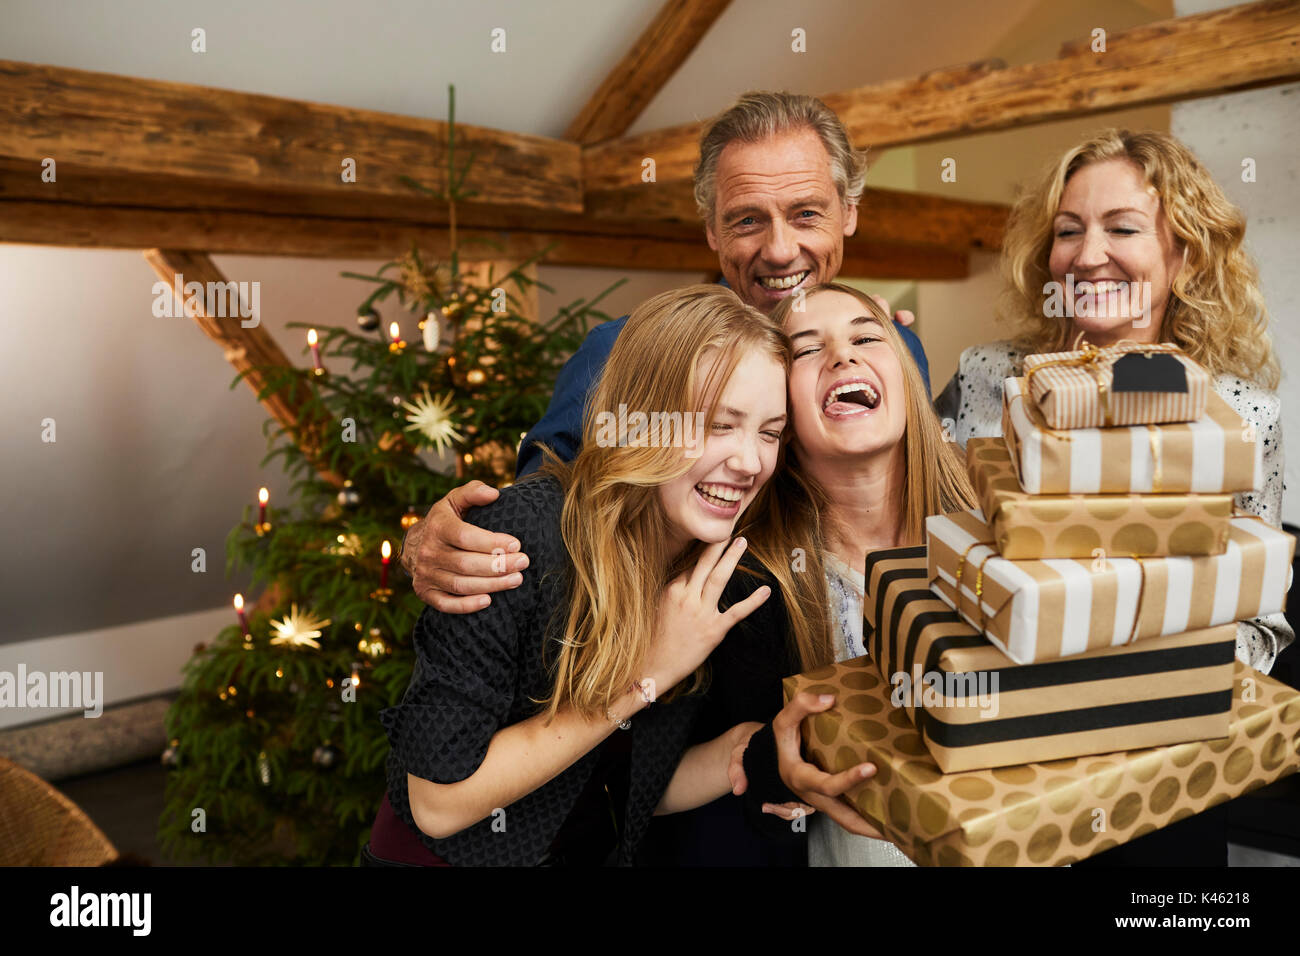 Parents and daughters with presents in front of Christmas tree, half portrait Stock Photo